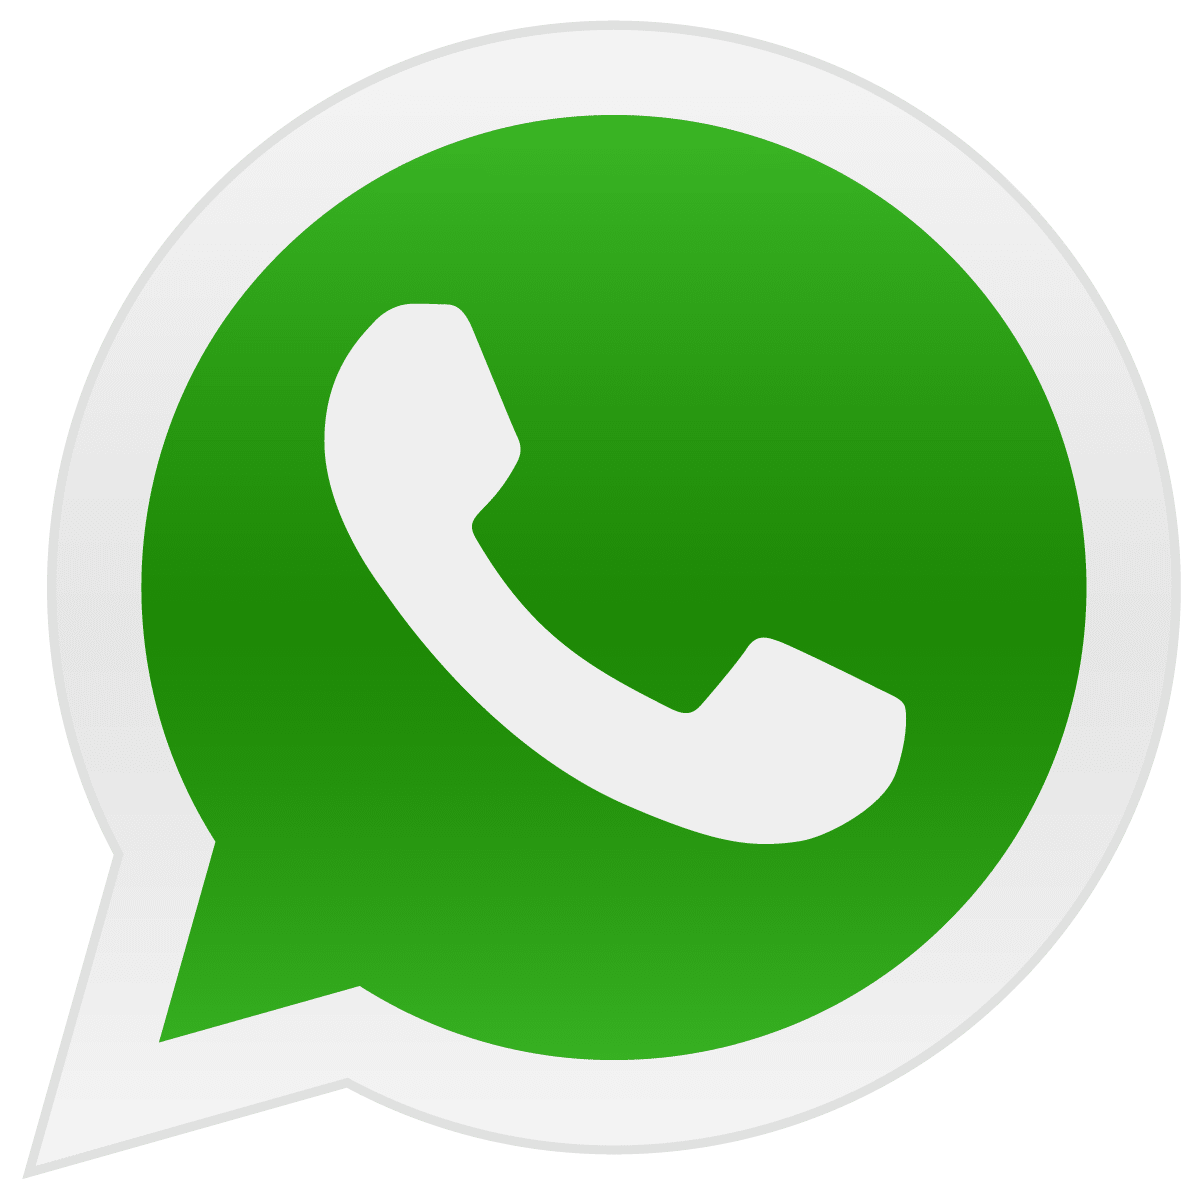 Join the Boduosupplies WhatsApp Community Today!